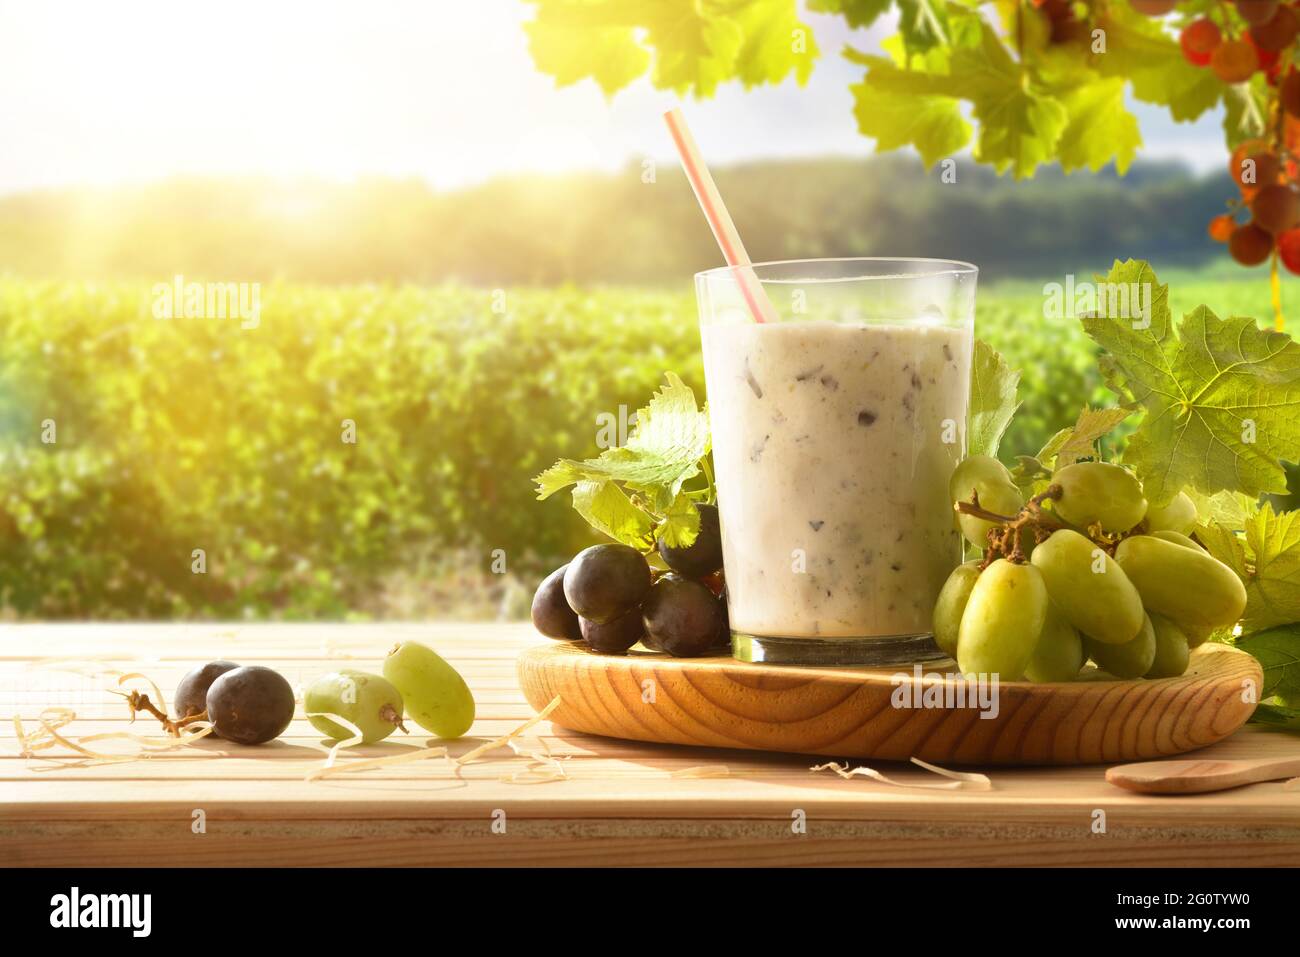 Grape drink with milk on wooden table with grape bunches and vineyard field in the background. Front view. Stock Photo